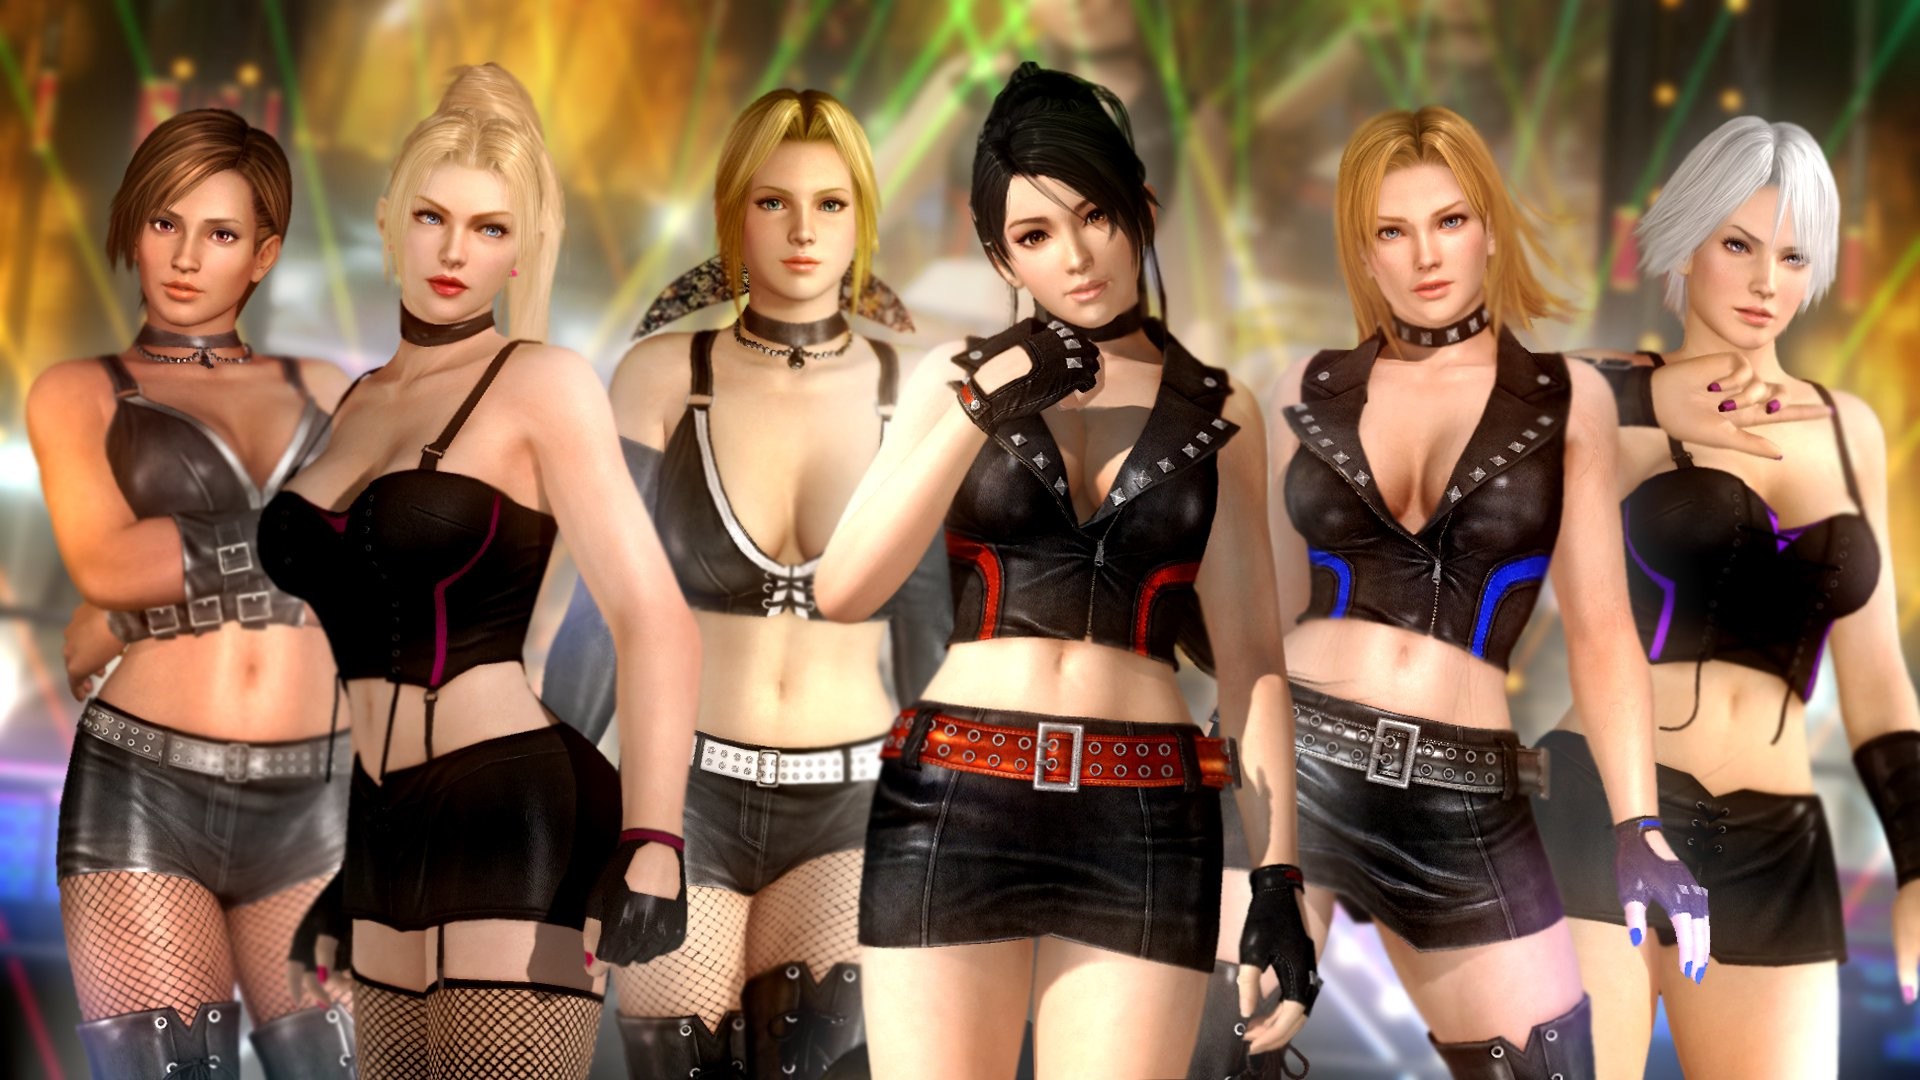 1920x1080 Dead or Alive 5 Group HD Wallpaper